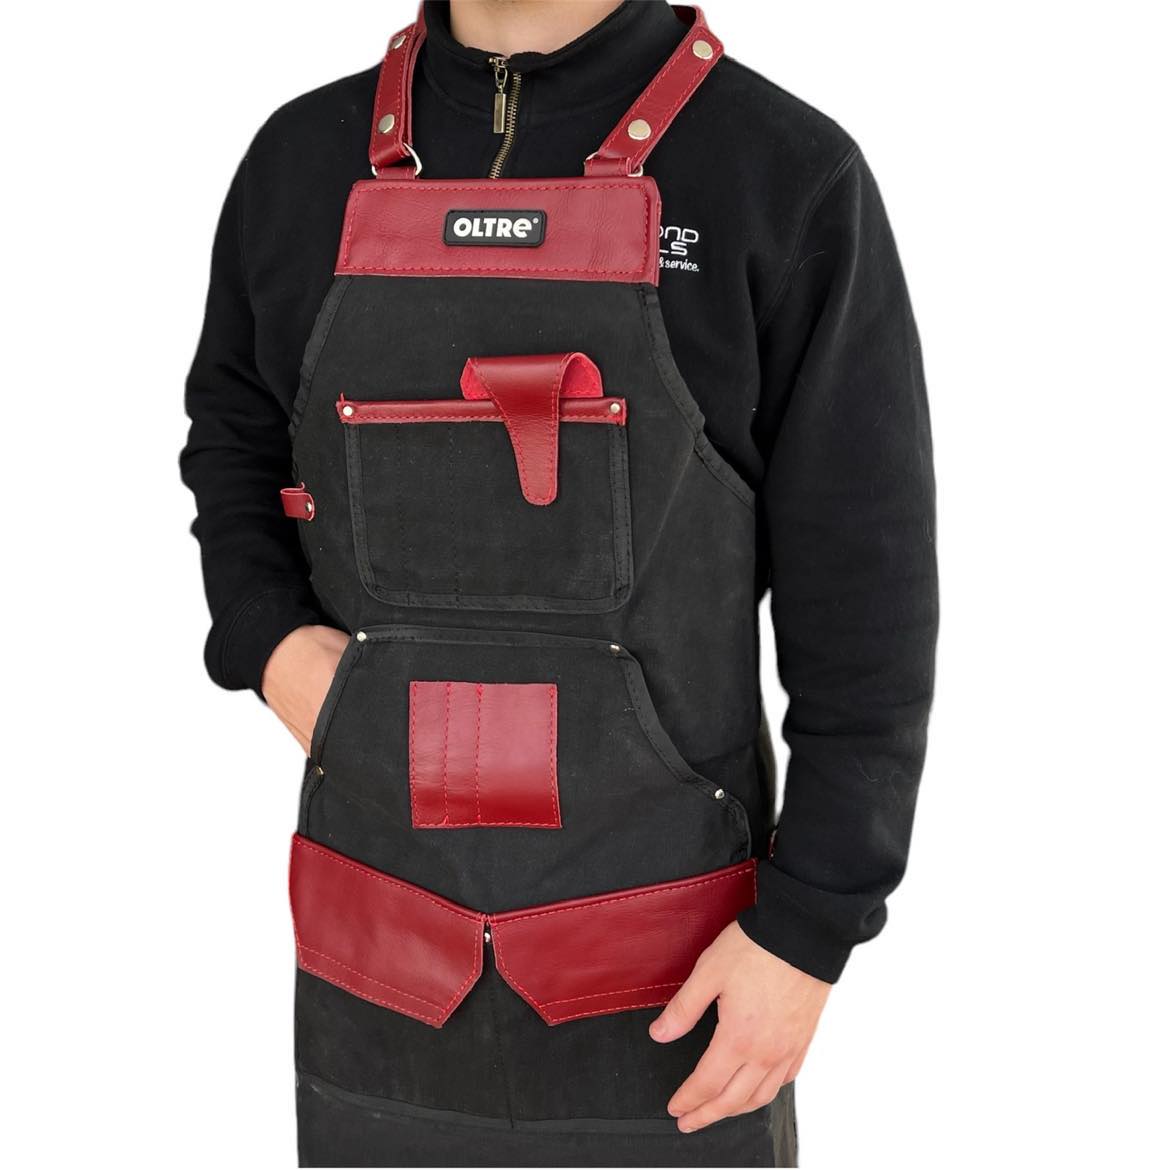 Black Canvas With Red Leather Apron By Oltre *New Arrival*